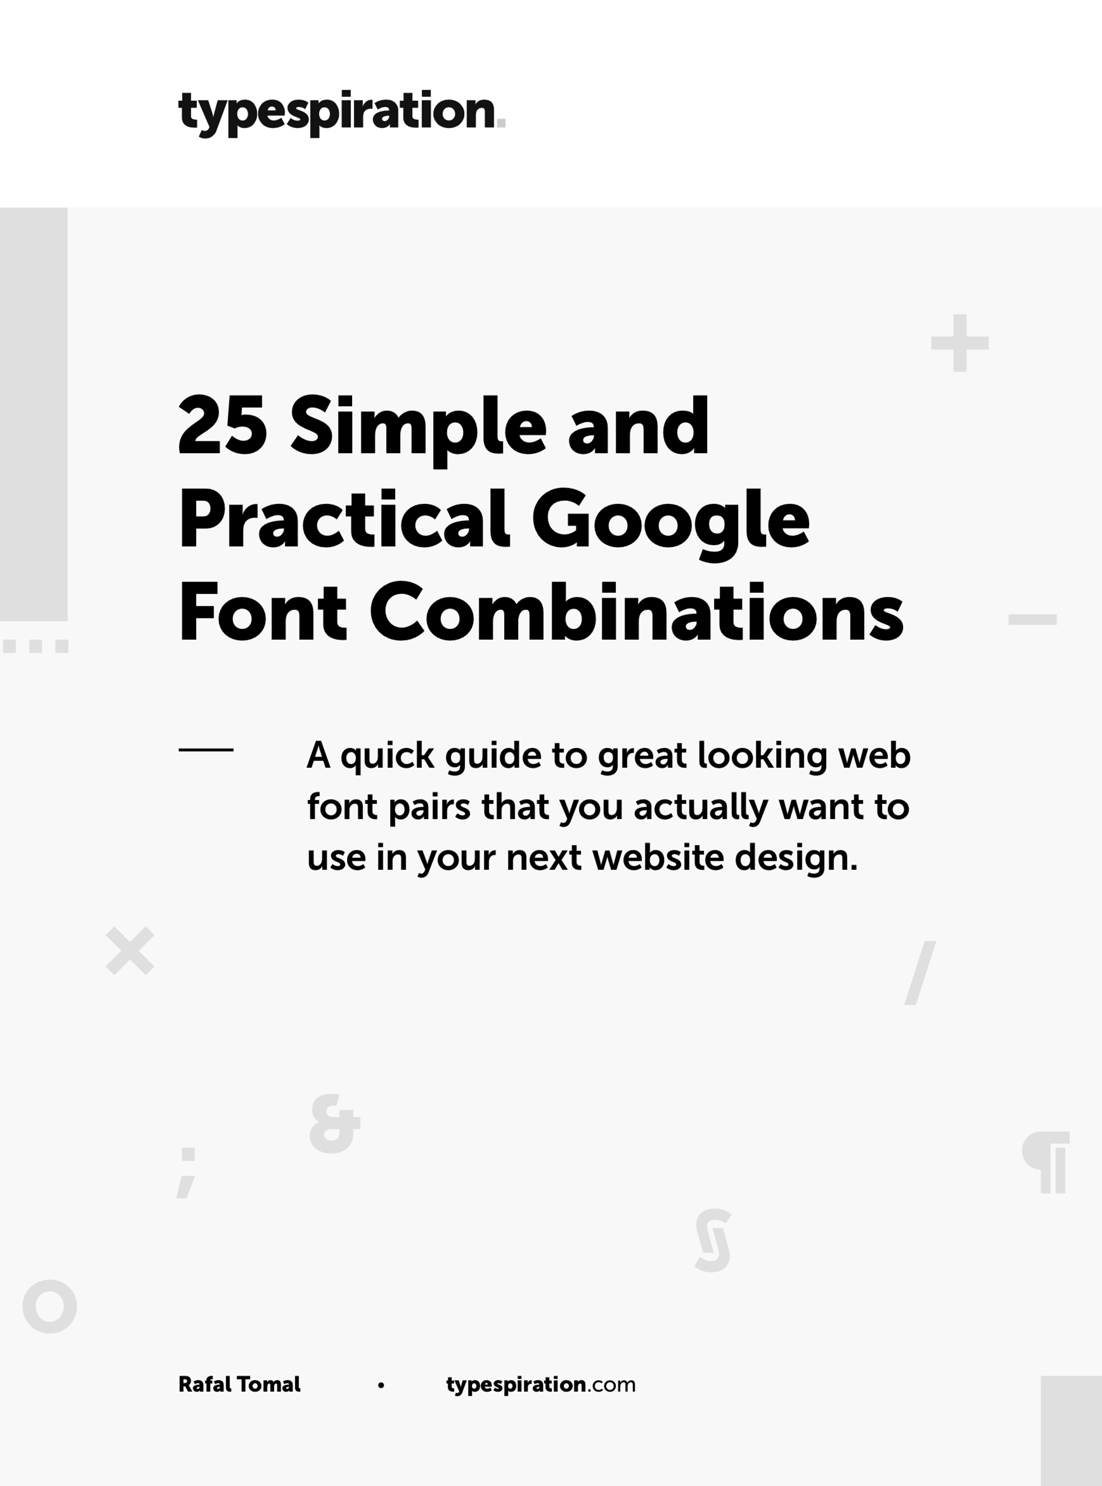 25 Simple and Practical Google Font Combinations